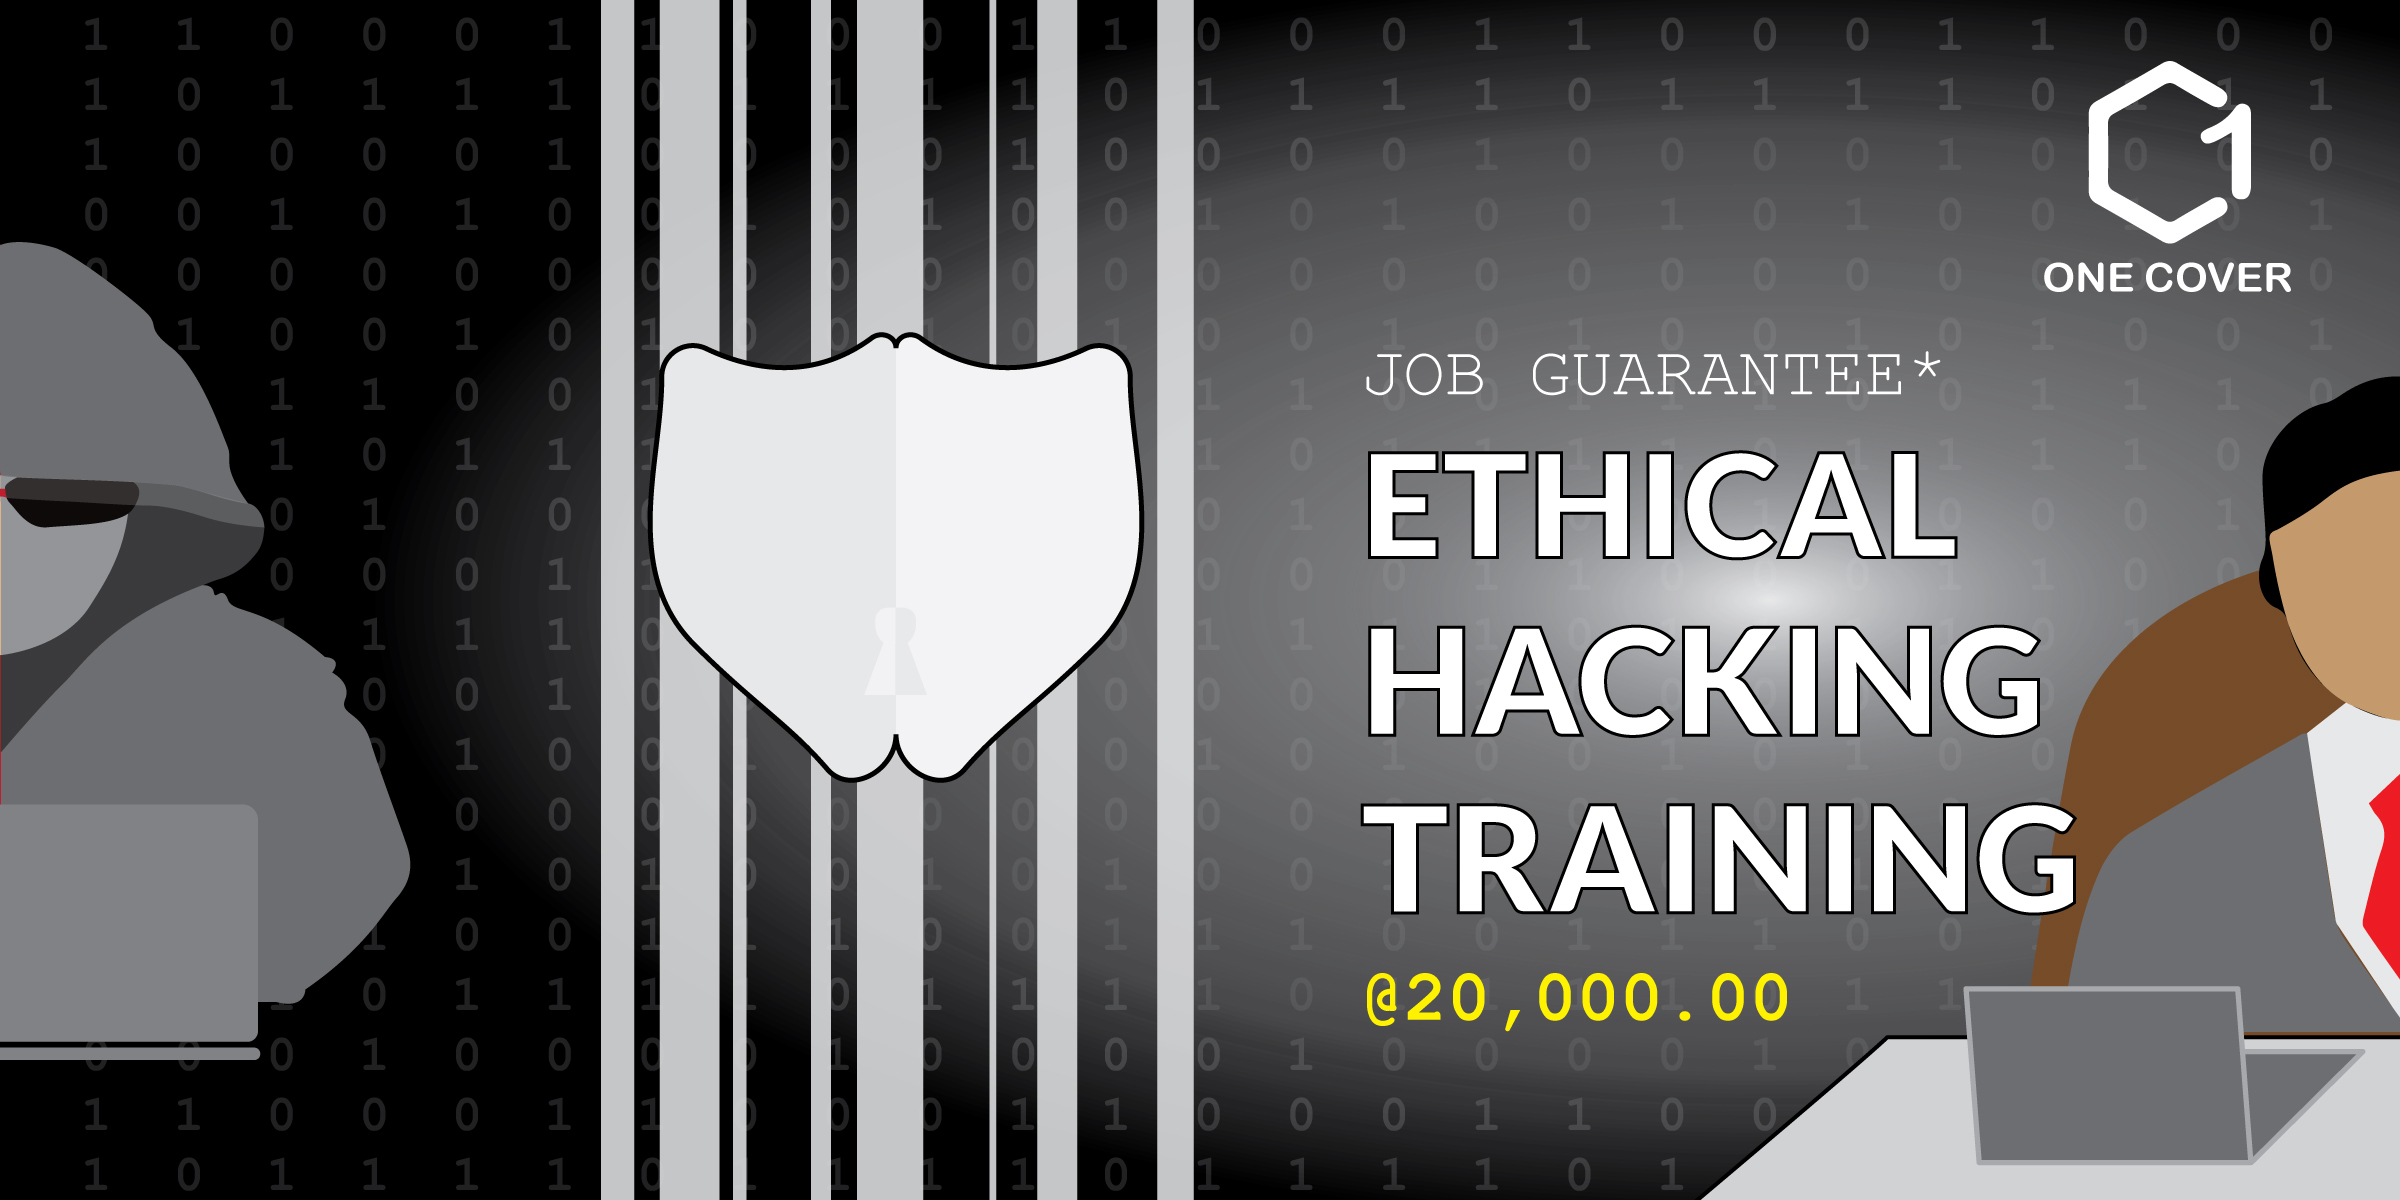 Ethical Hacking Training in Nepal, Ethical Hacking Course Price in Nepal | One Cover Nepal